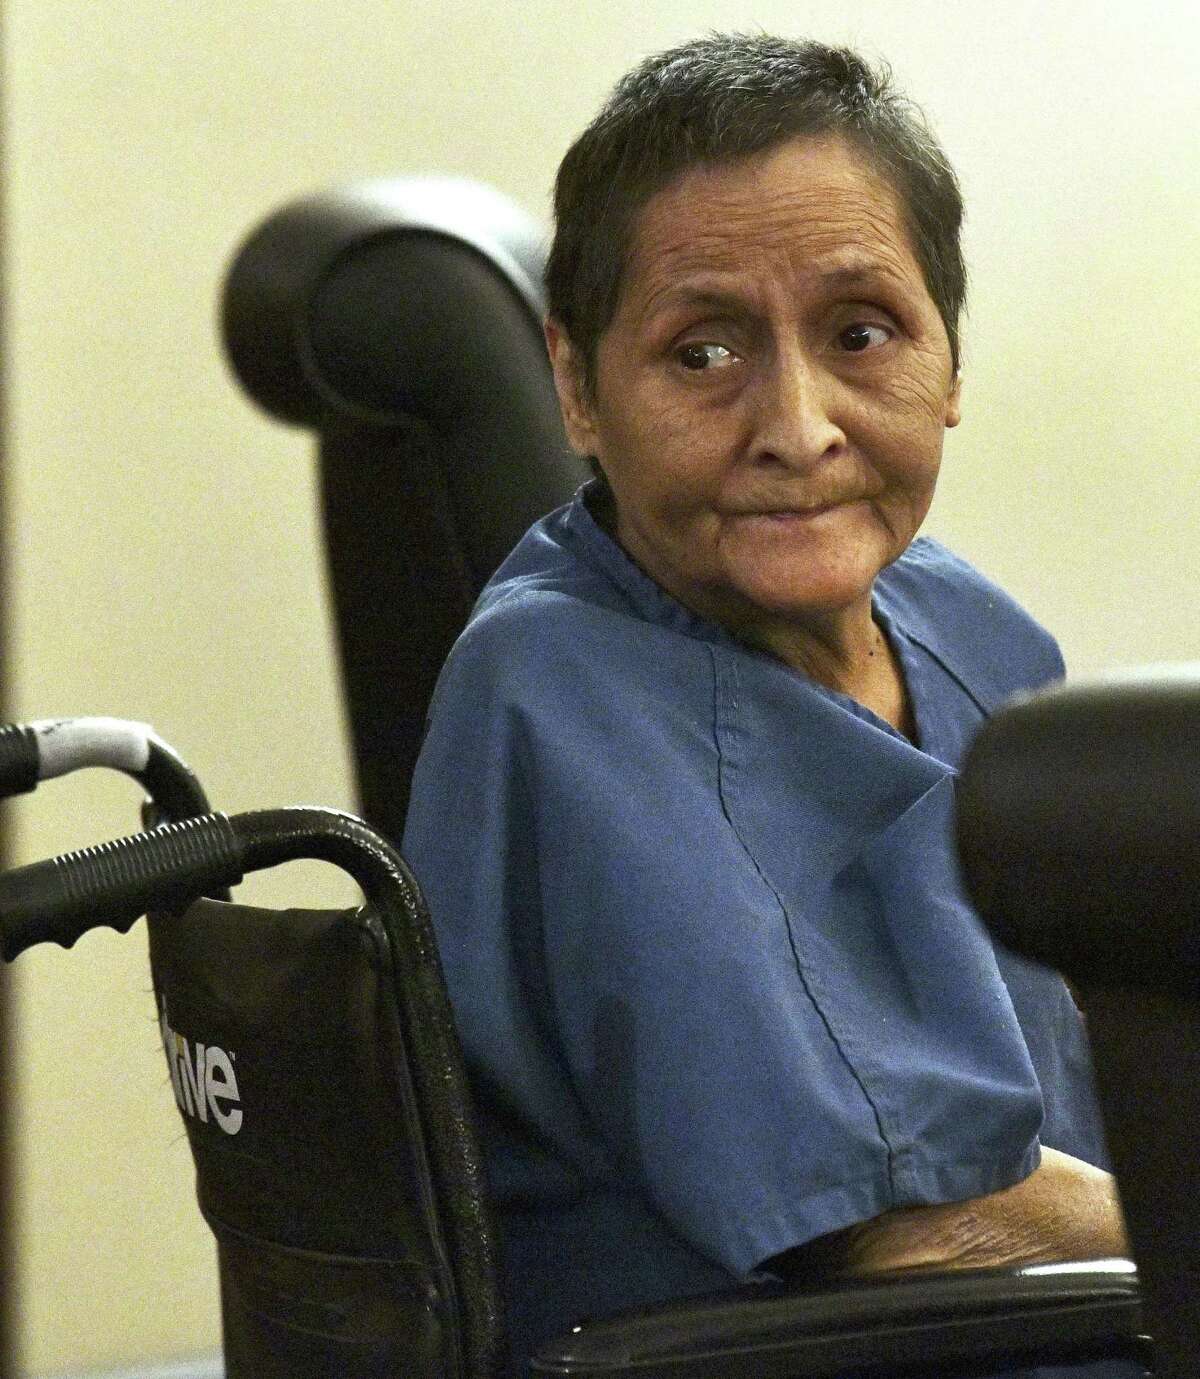 Beatrice Sampayo, 64, who is accused of helping cover up the death of her 8-month-old grandson, King Jay Davila, listens during a Friday hearing at which her bail was reduced from $250,000 to $50,000 by Judge Andrew Carruthers.